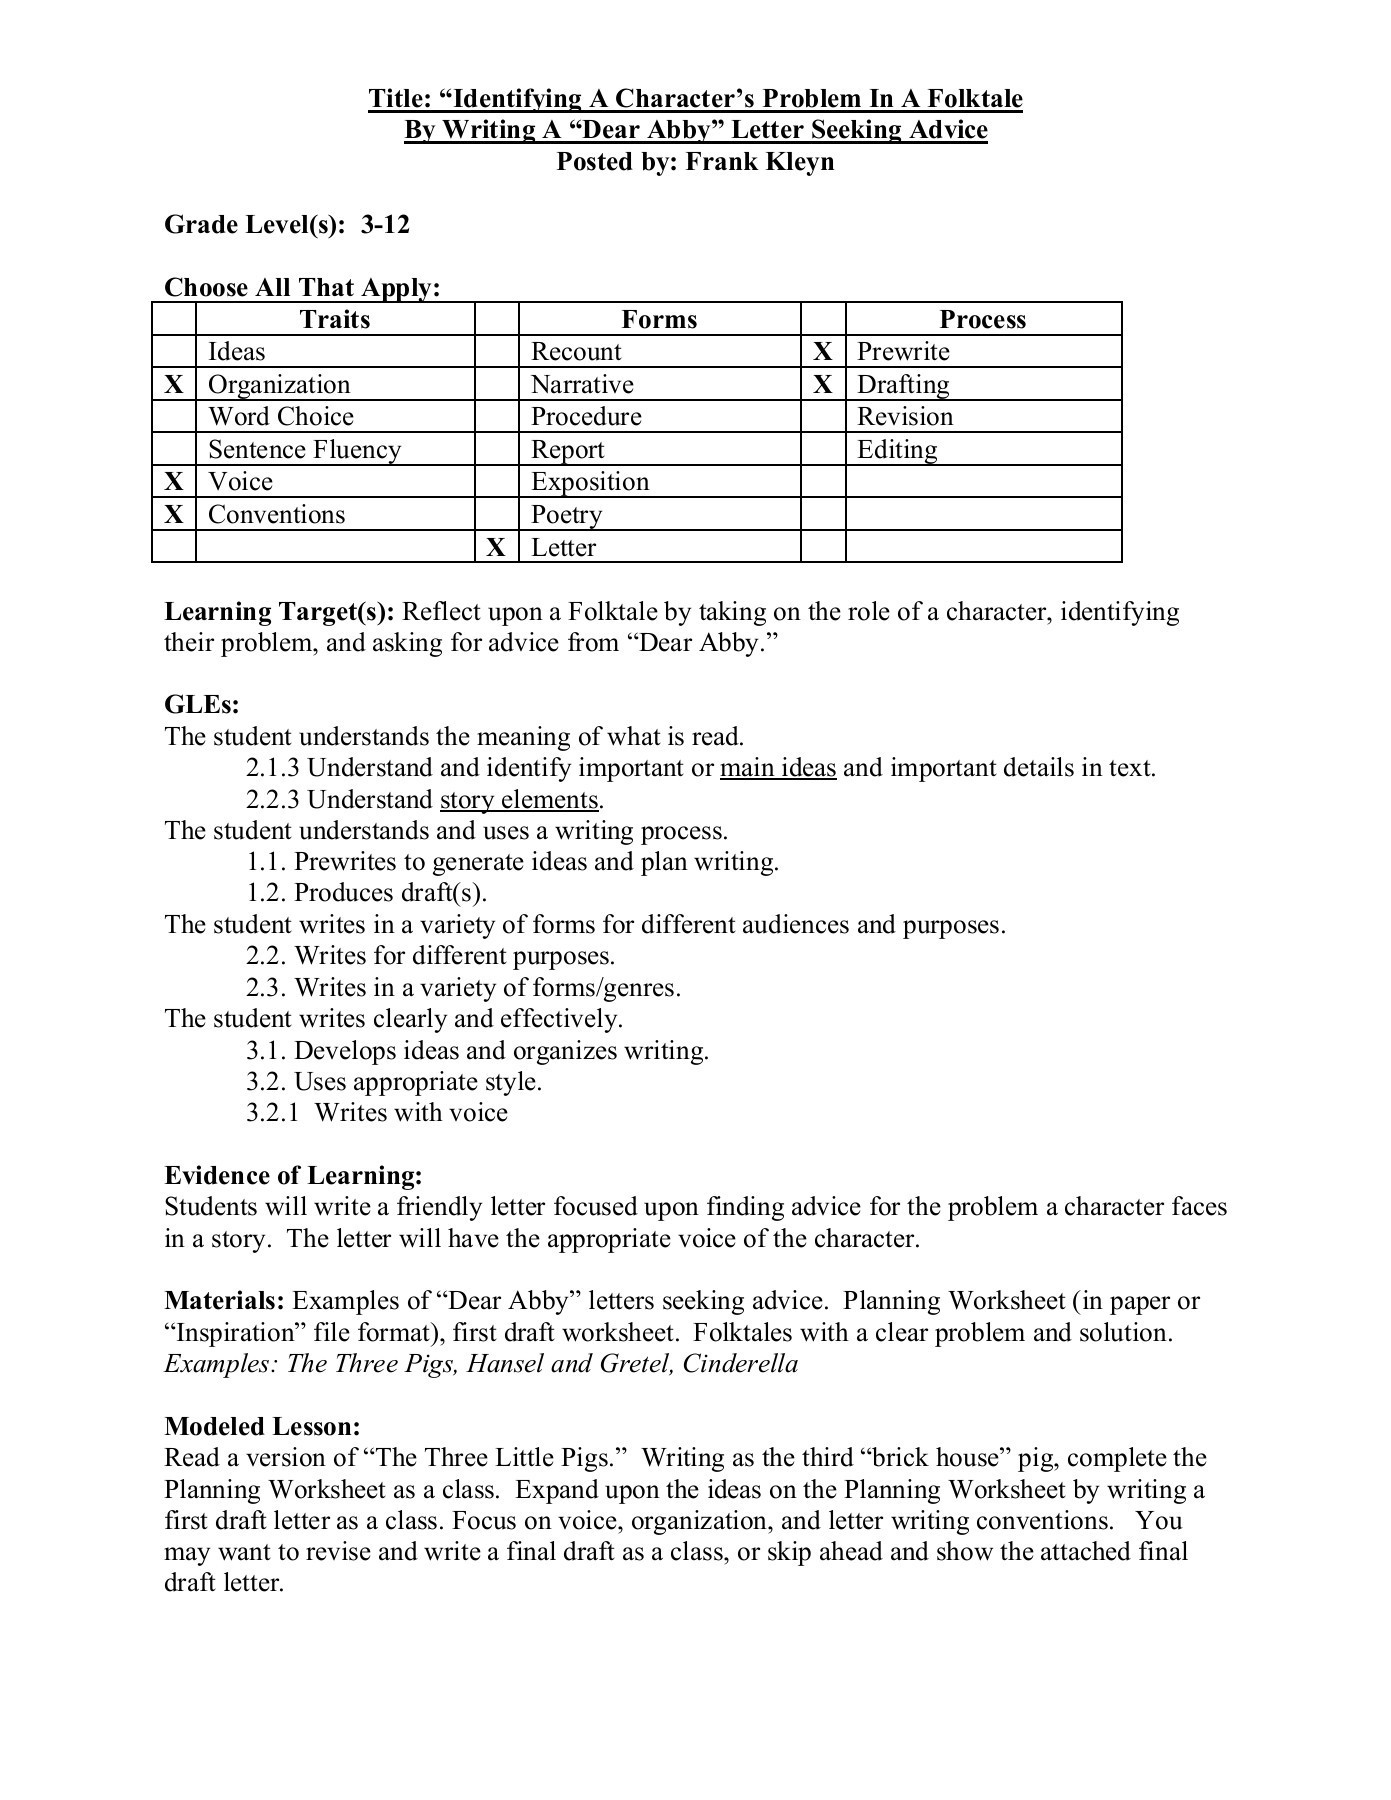 Problem and solution Worksheet Title “identifying A Character S Problem In A Folktale